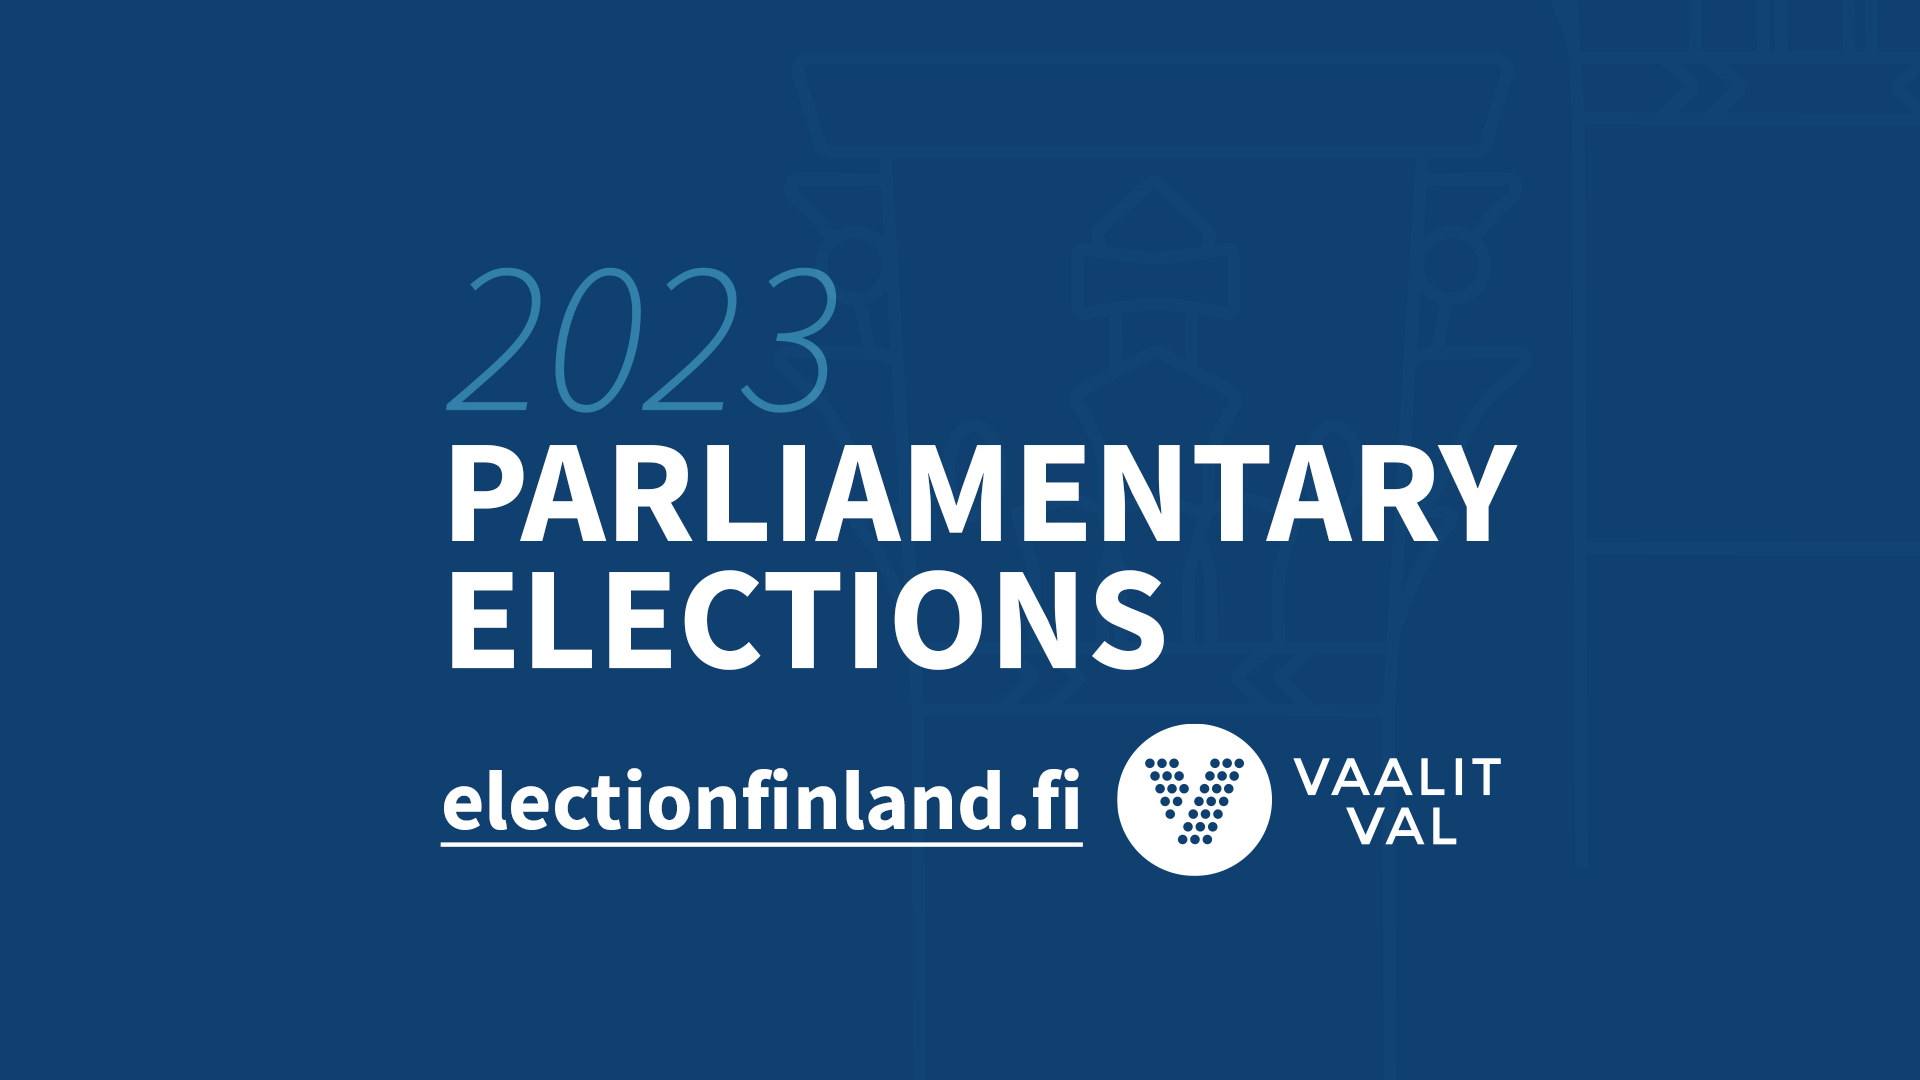 More information about the parliamentary elections of year 2023